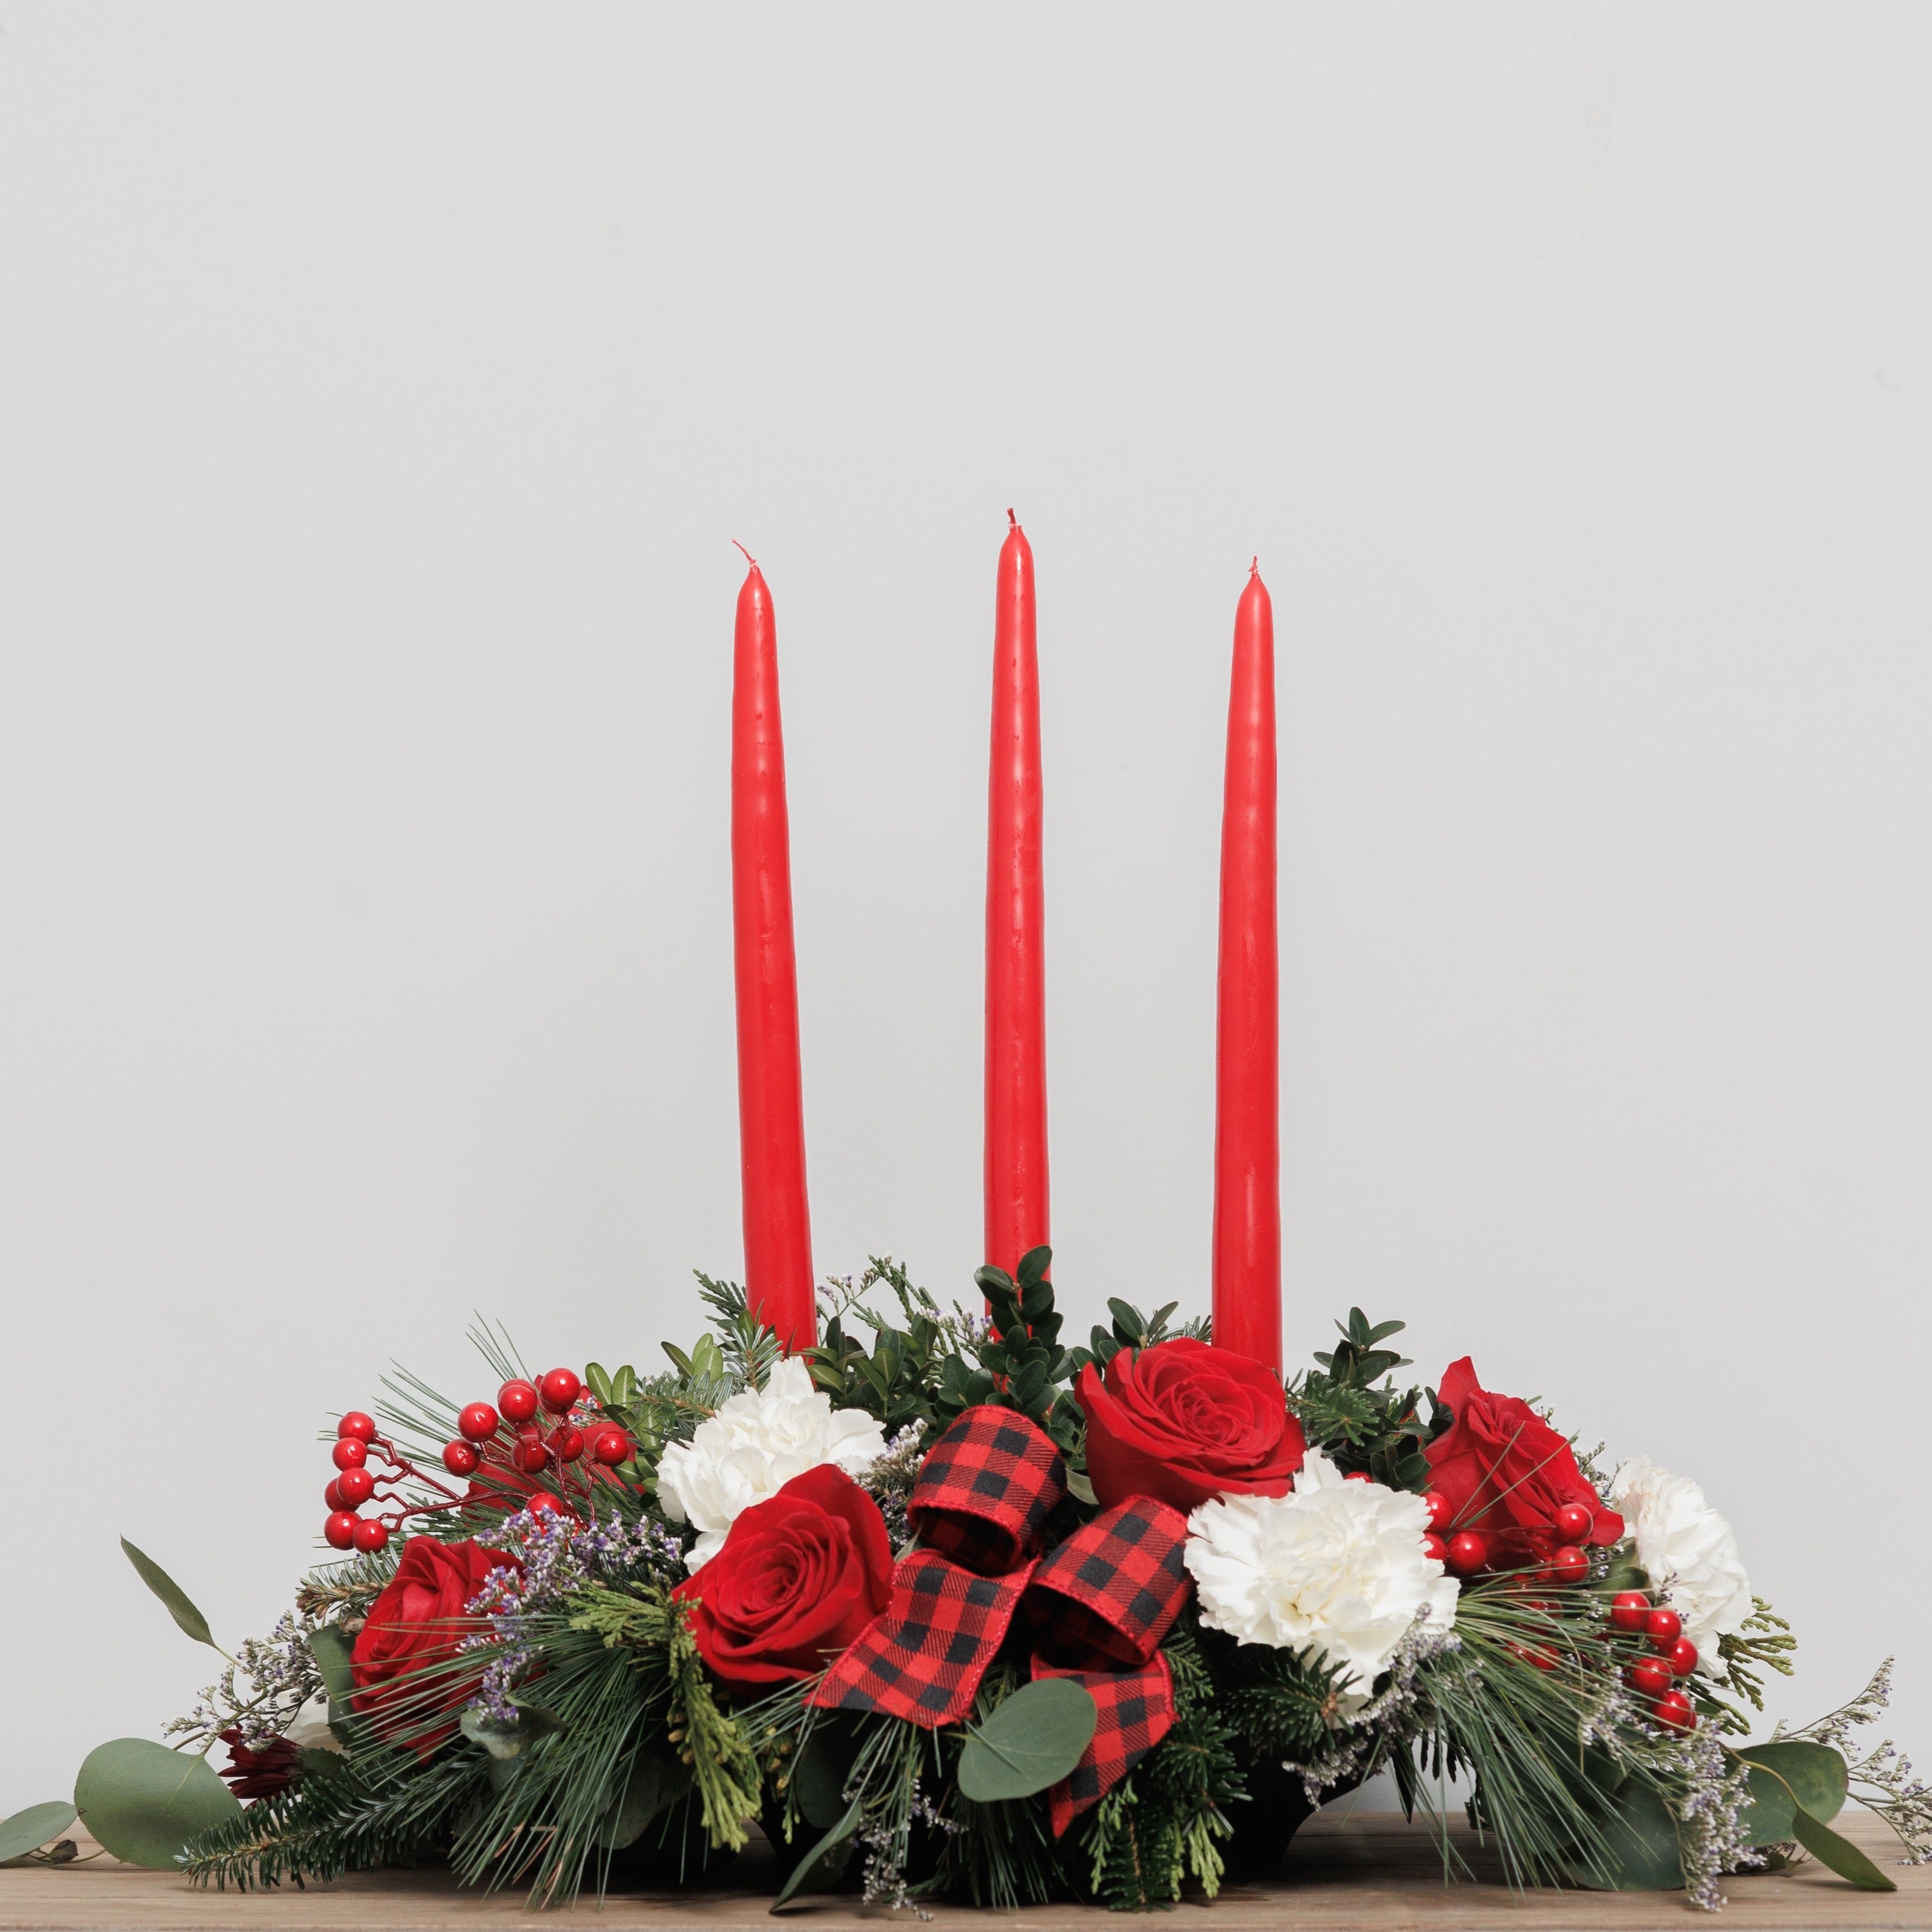 A red and white Christmas centerpiece with 3 red candles.